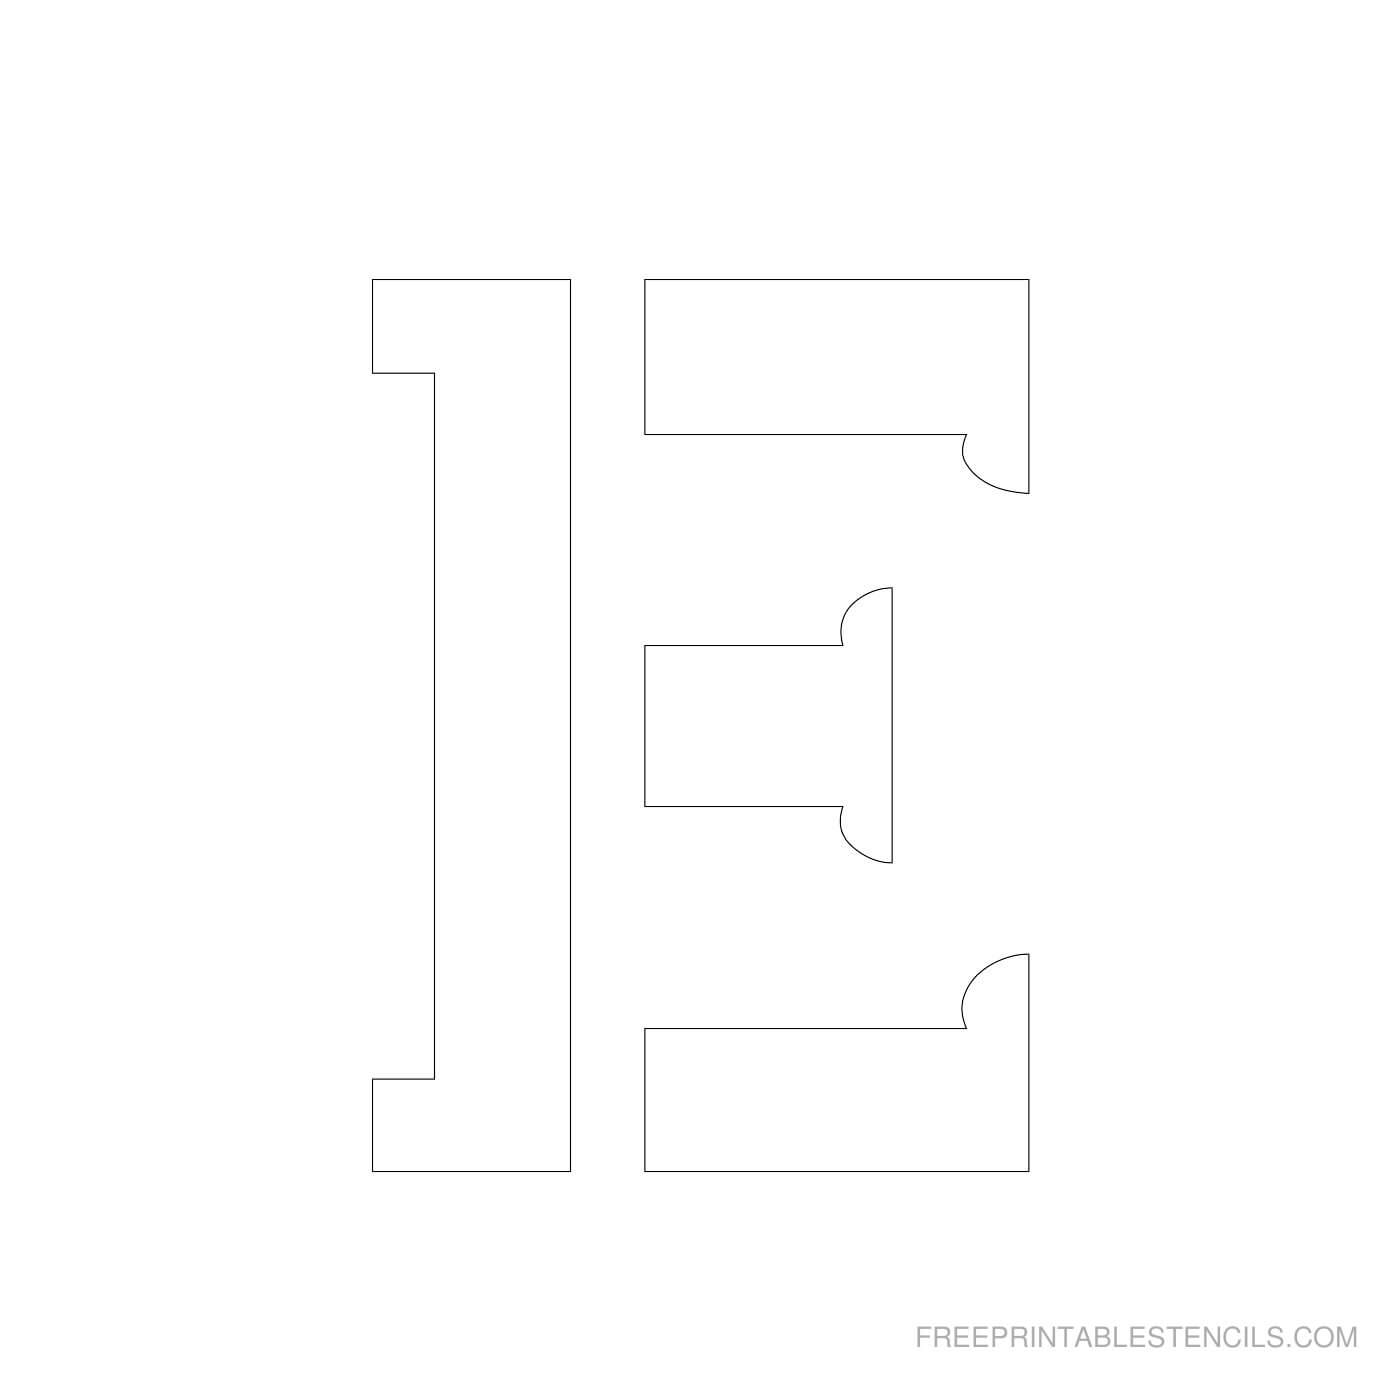 Printable 4 Inch Letter Stencils A Z | Free Printable Stencils Inside 4 Inch Letter Template